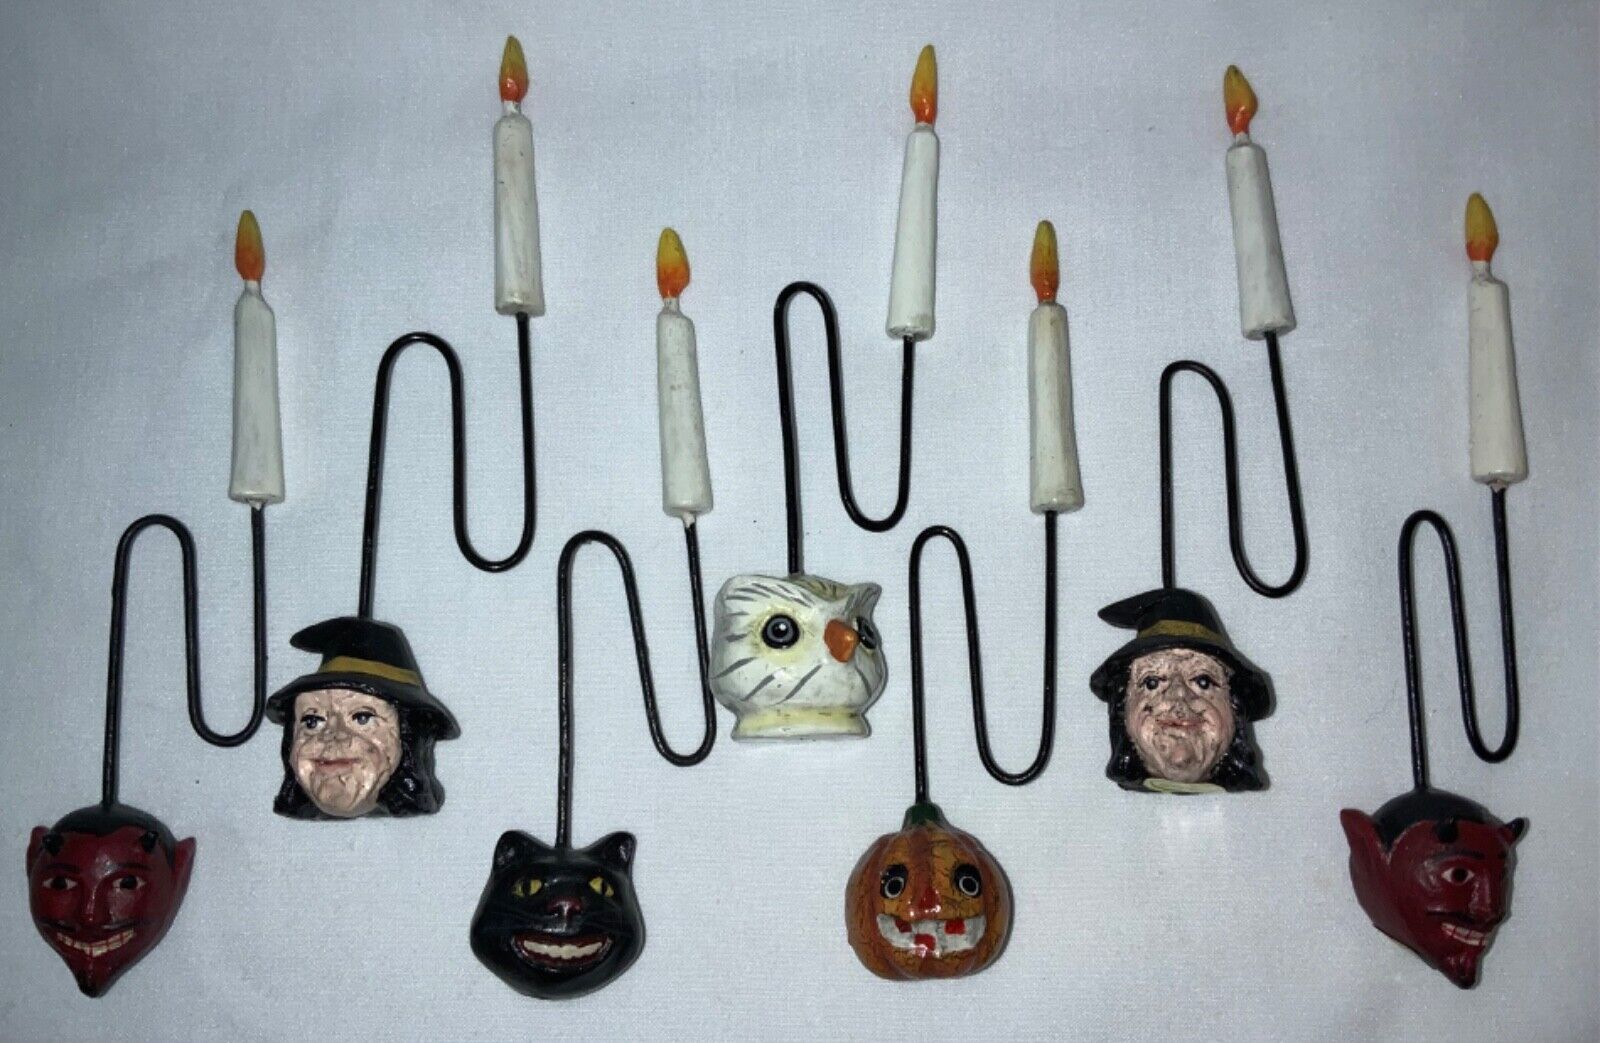 VINTAGE-STYLE ‘BETHANY LOWE’ CANDLE COUNTERWEIGHT - HALLOWEEN TREE ORNAMENTS